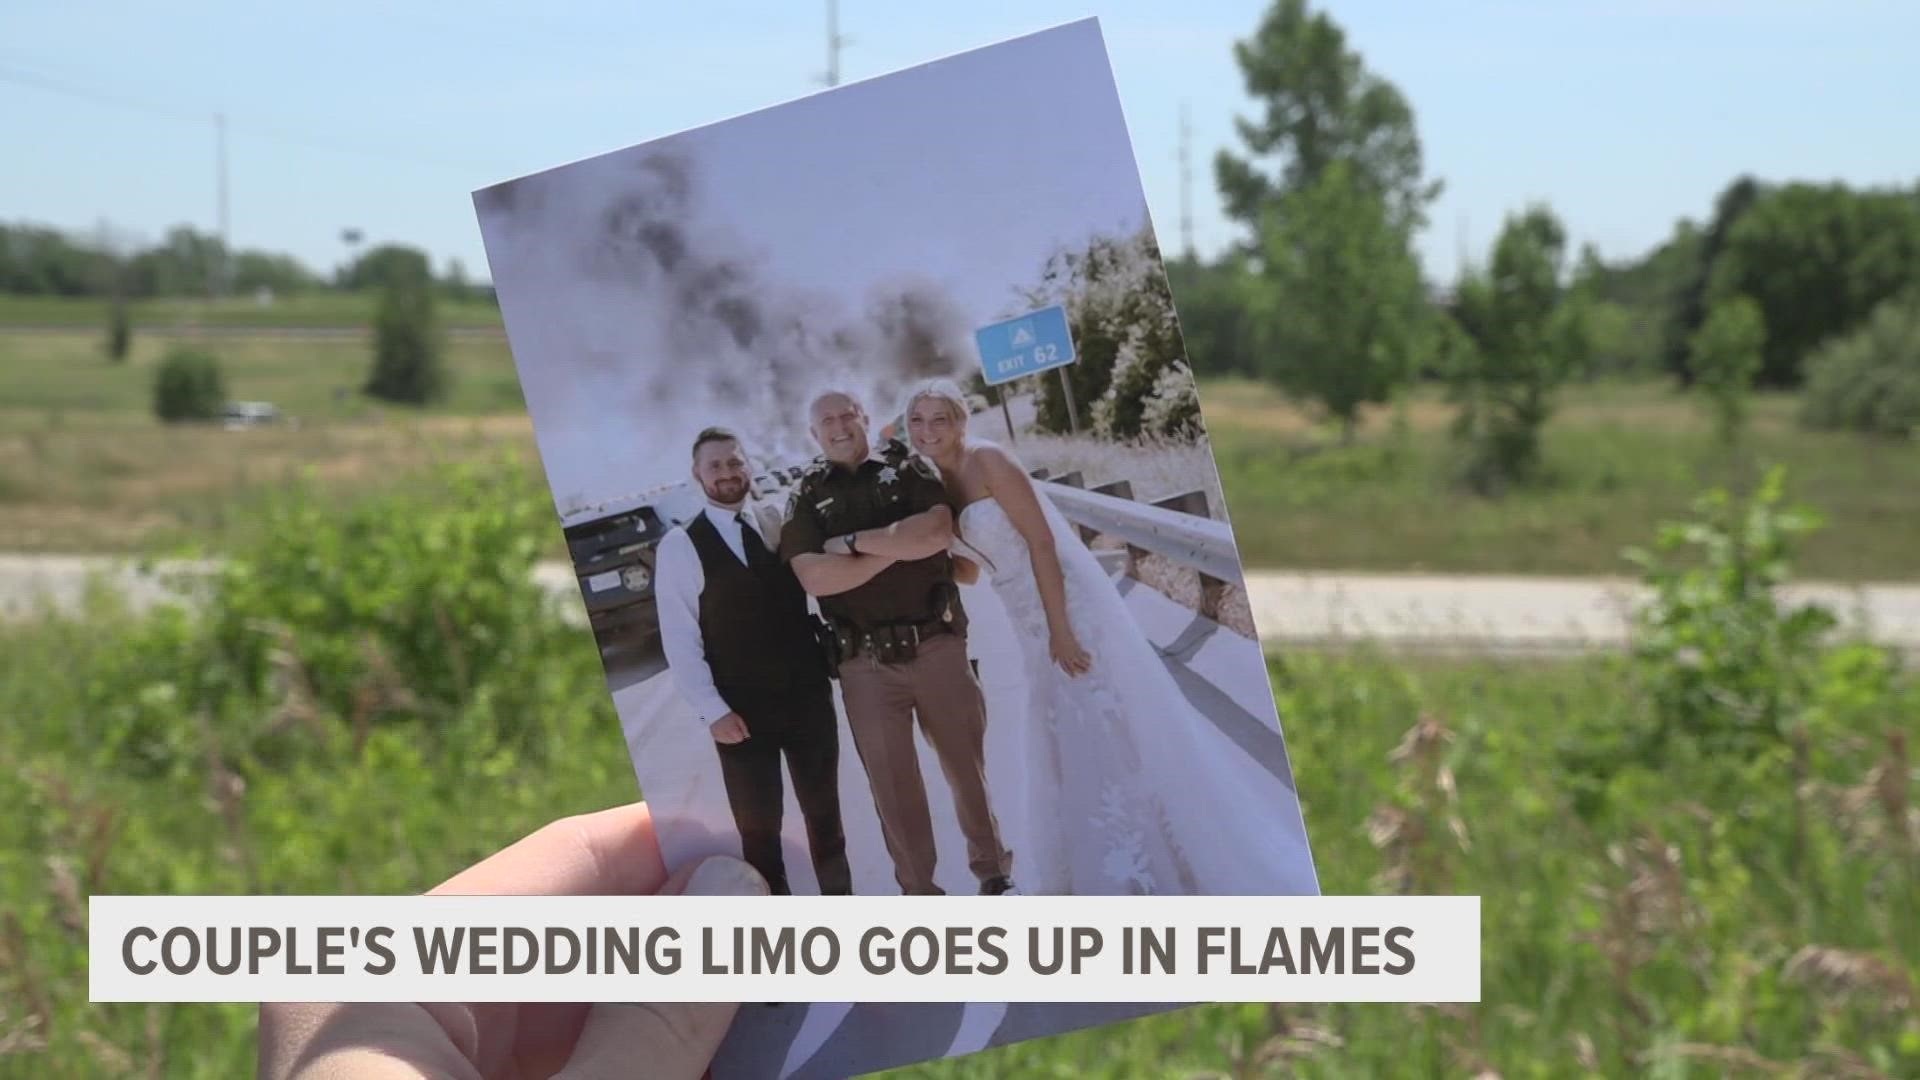 Isabel and Brendan Kiel's limo began to smoke en route to their reception. Everyone made it out safely, and the bridal party is left with memories for a lifetime.